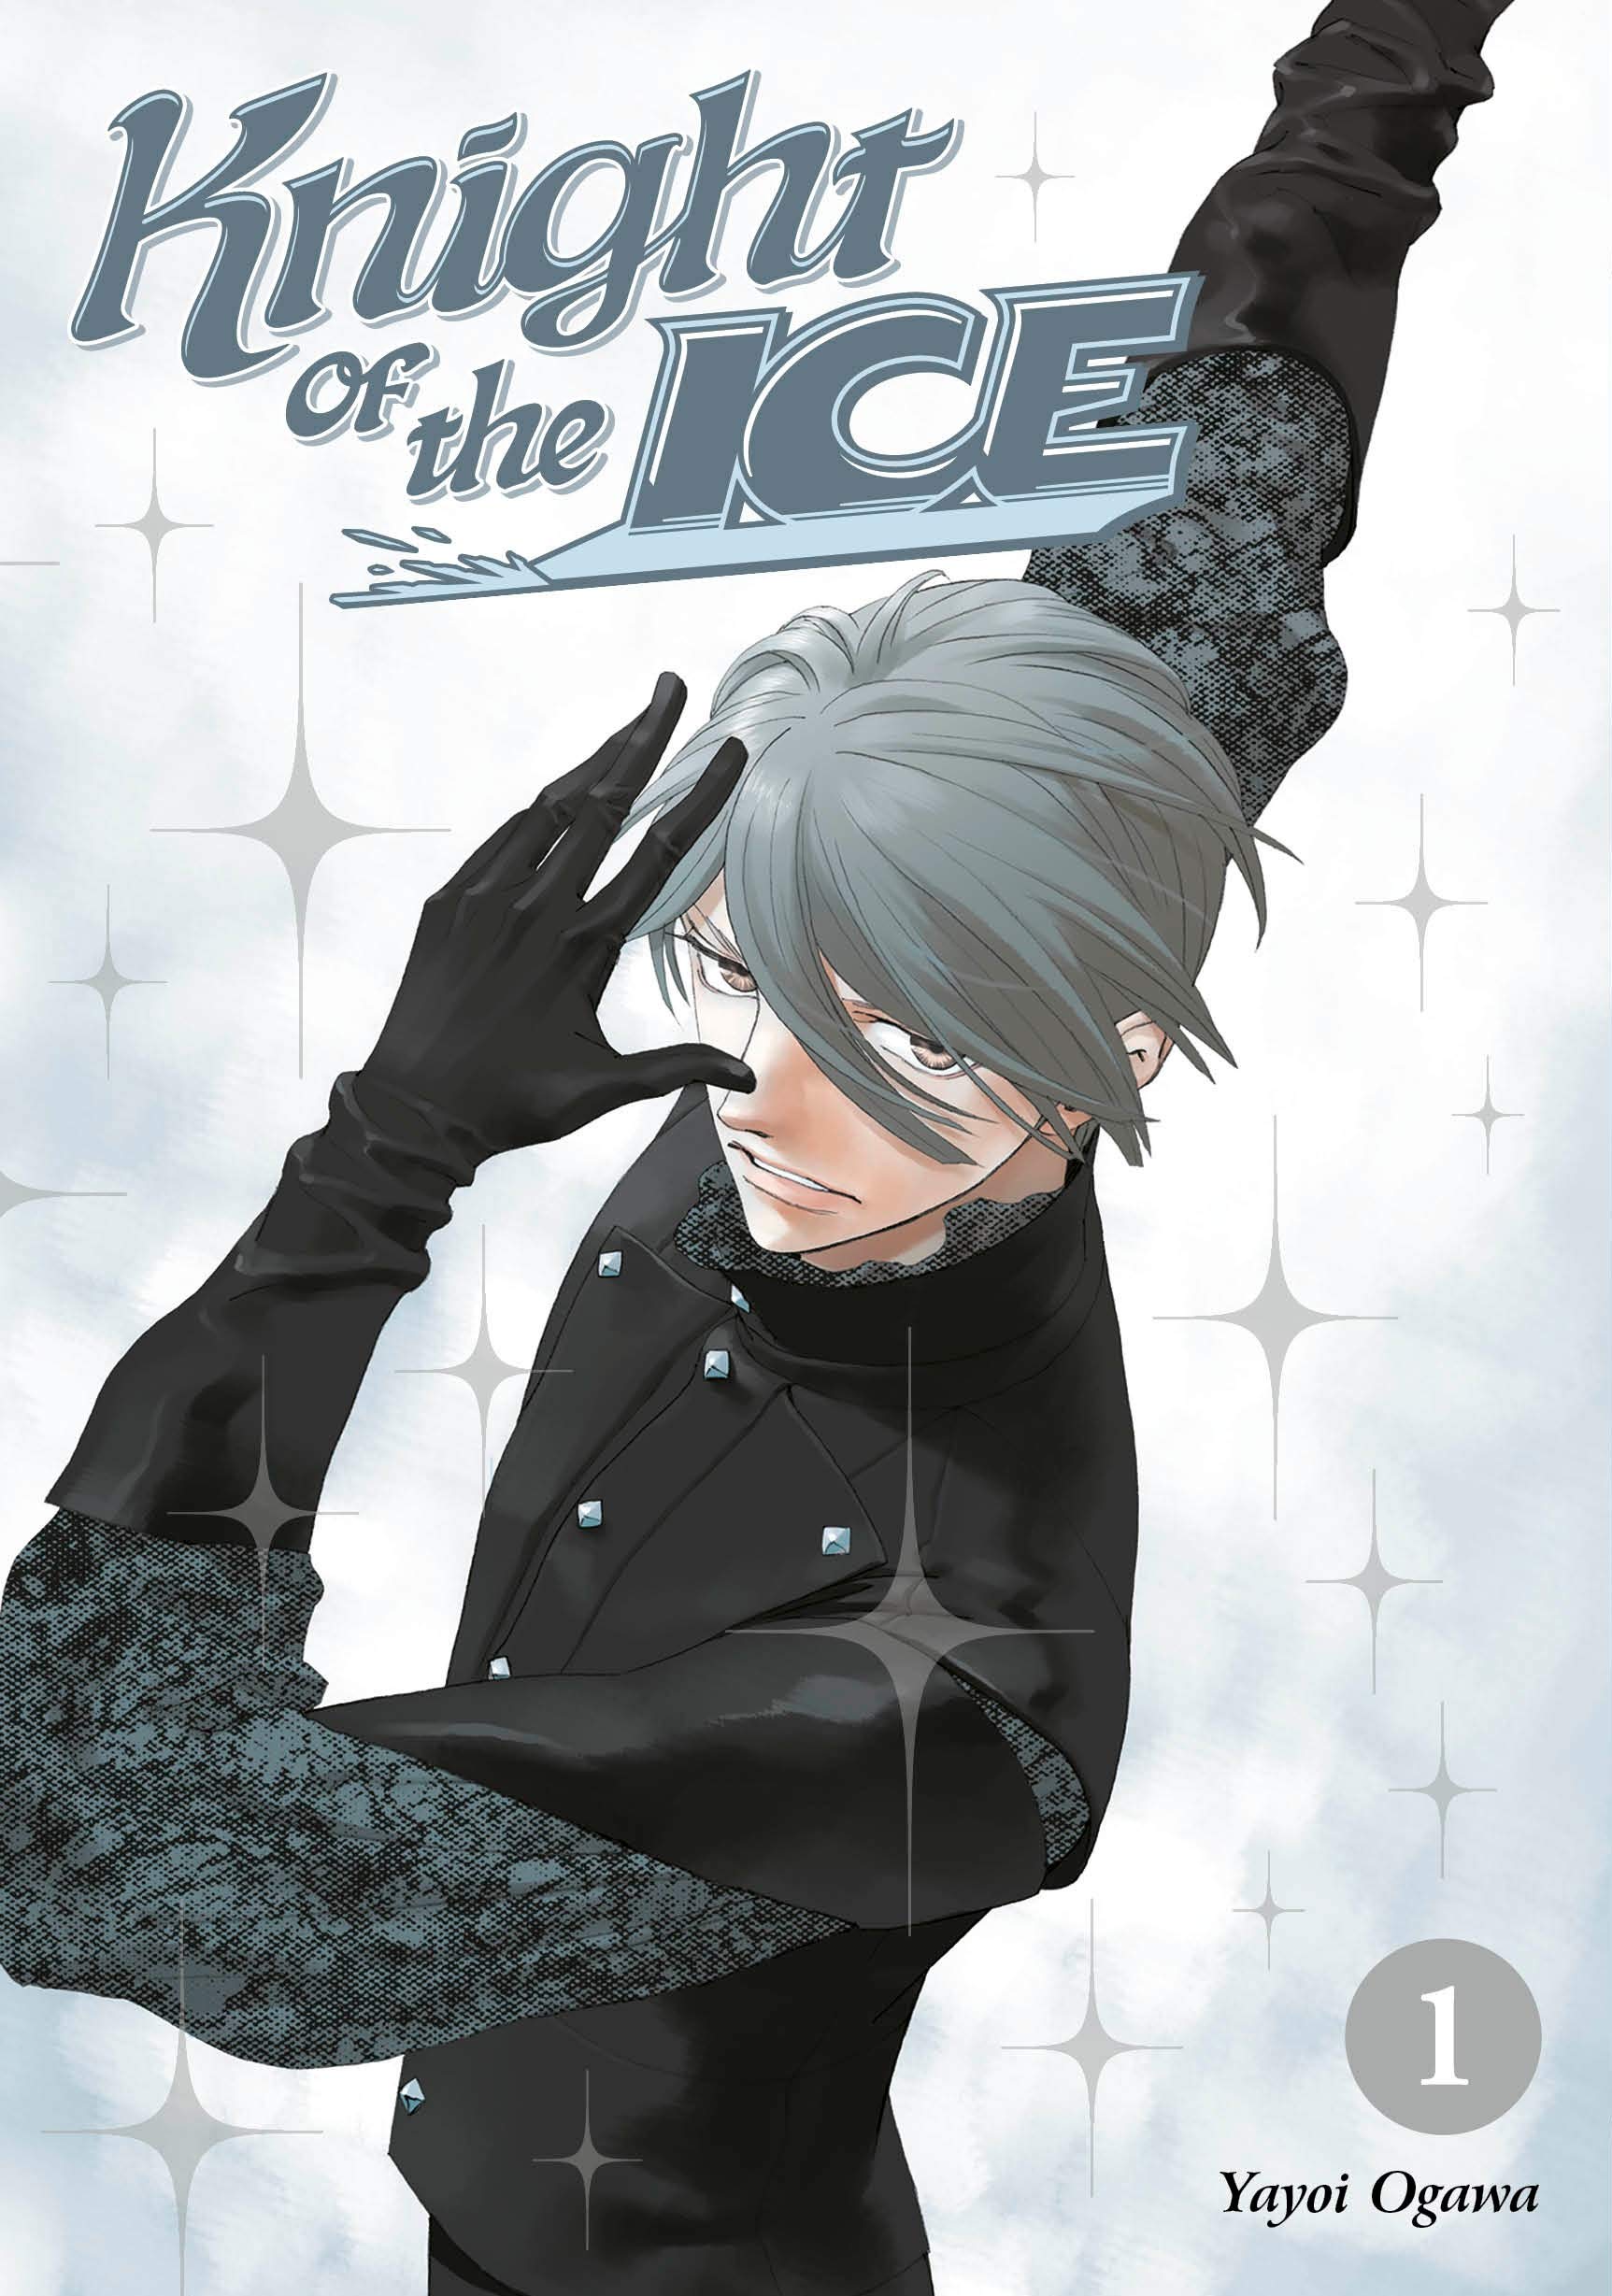 Knight of the Ice - Volume 1